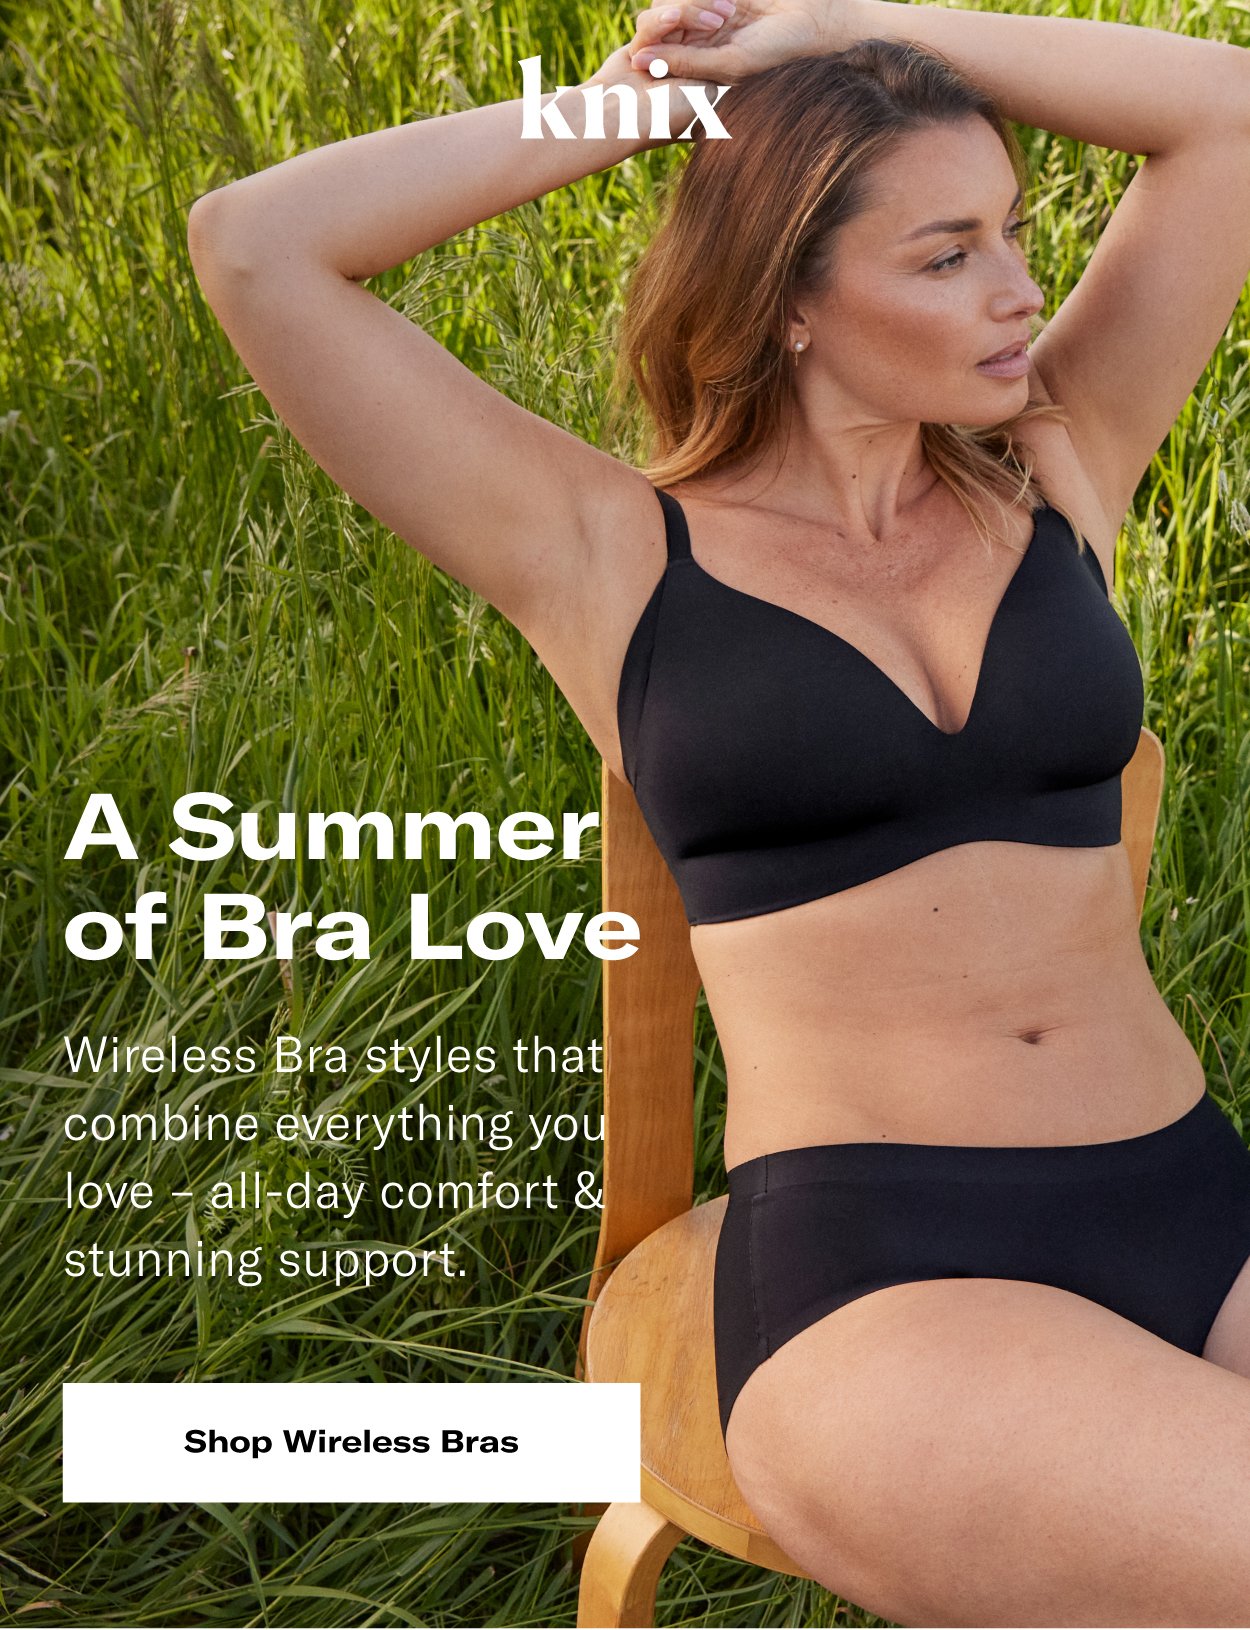 Say goodbye to discomfort, and hello to our Wireless Bra! 👋 Our wireless  bras give you the right amount of support and comfort. Sizes